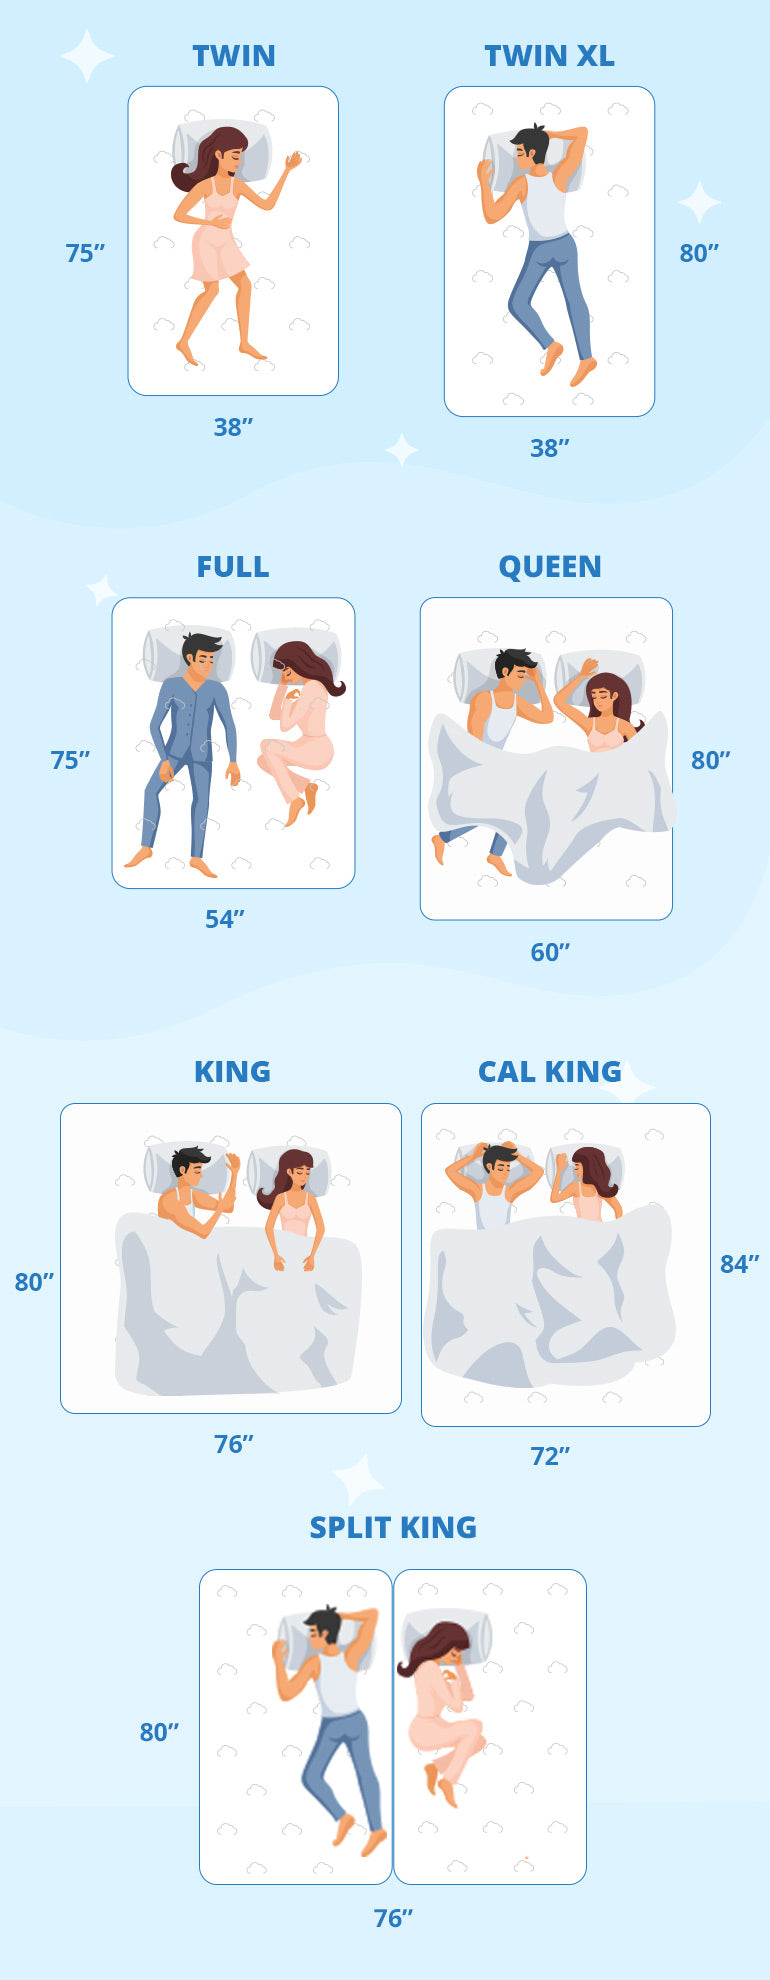 What Is a Split King Bed?